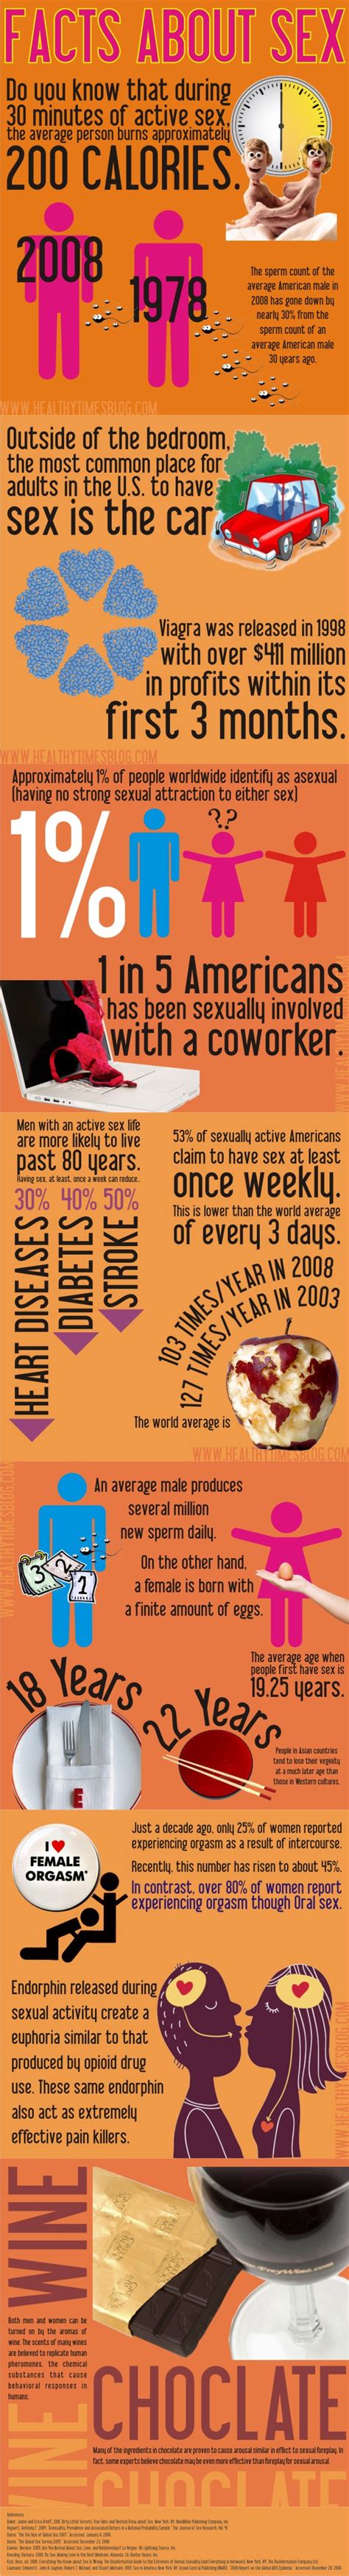 facts about sex [infographic] endorphin released released during sexual activity create a